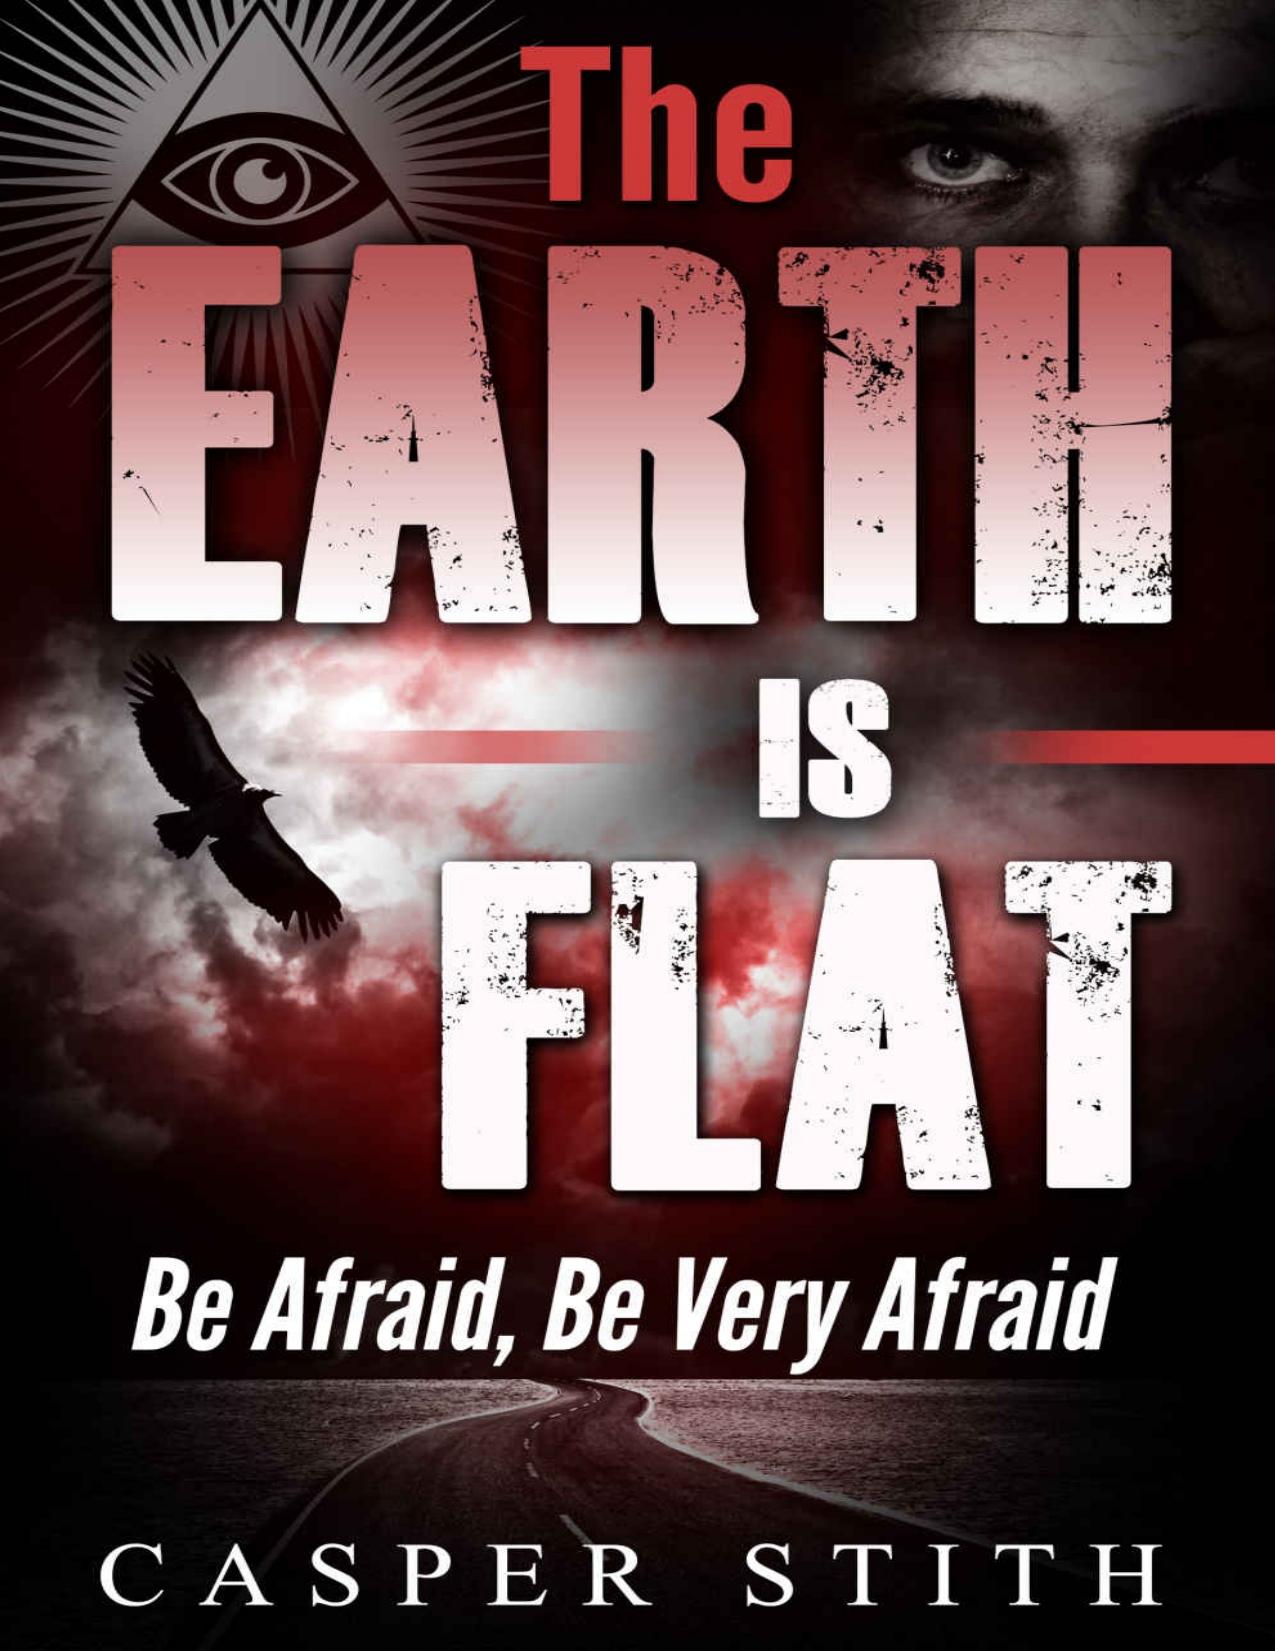 The Earth is Flat: Be Afraid, Be Very Afraid \(They’re Lying - The Earth Really is Flat\) \(Illuminati Secrets Book 4\) - PDFDrive.com